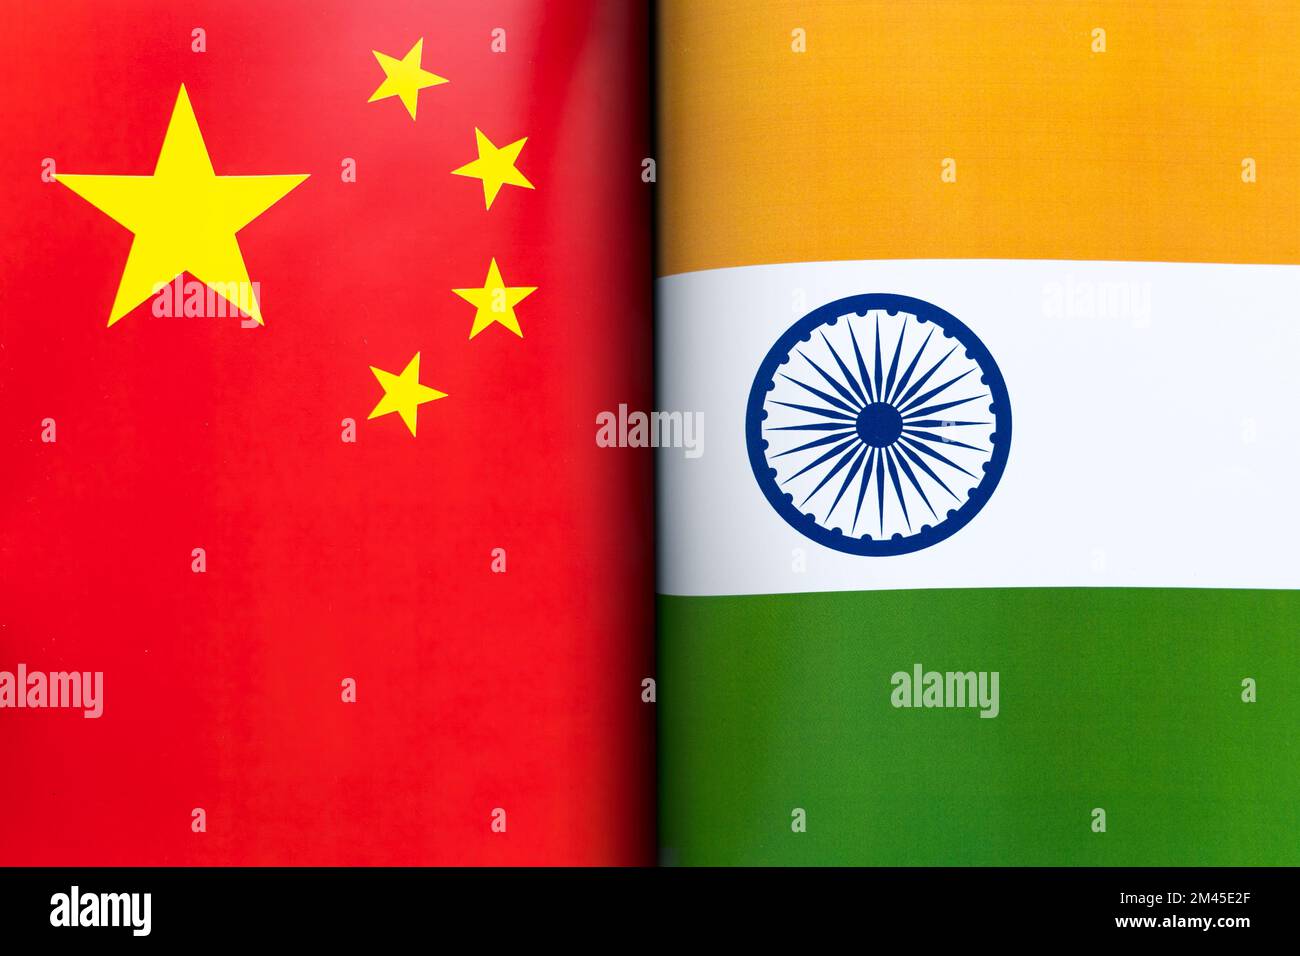 Flags india and china. The concept of international relations between countries. The state of governments. Friendship of peoples. Stock Photo